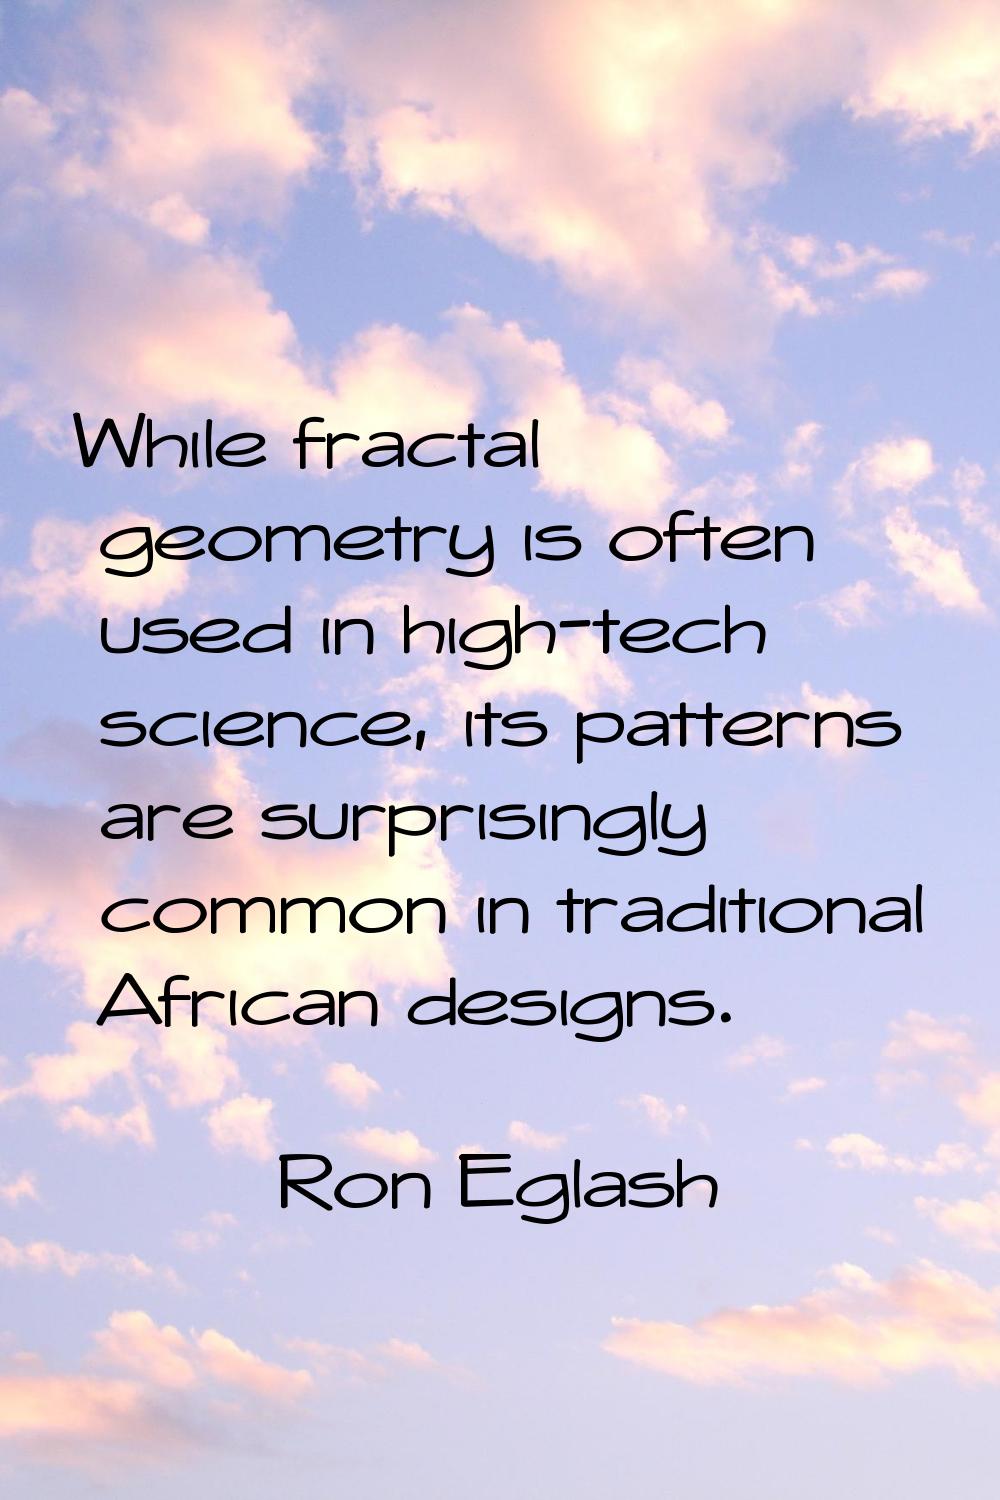 While fractal geometry is often used in high-tech science, its patterns are surprisingly common in 